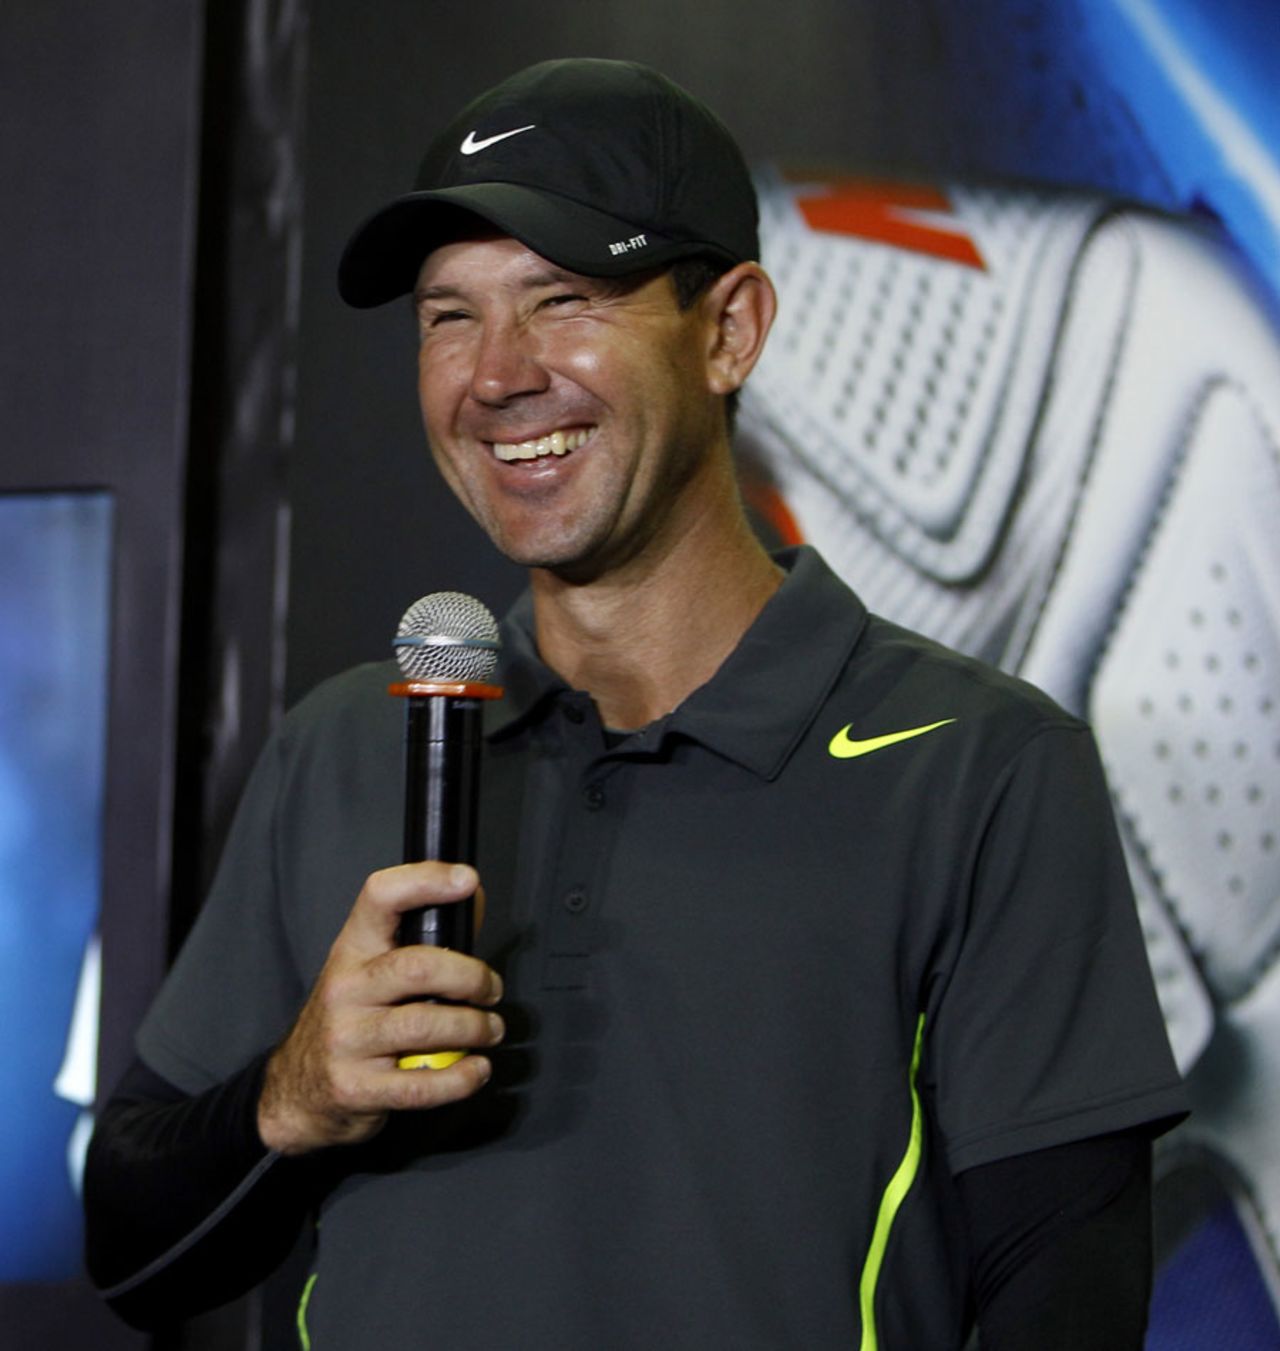 Ricky Ponting at a promotional event ahead of the IPL, Bangalore, April 1, 2013